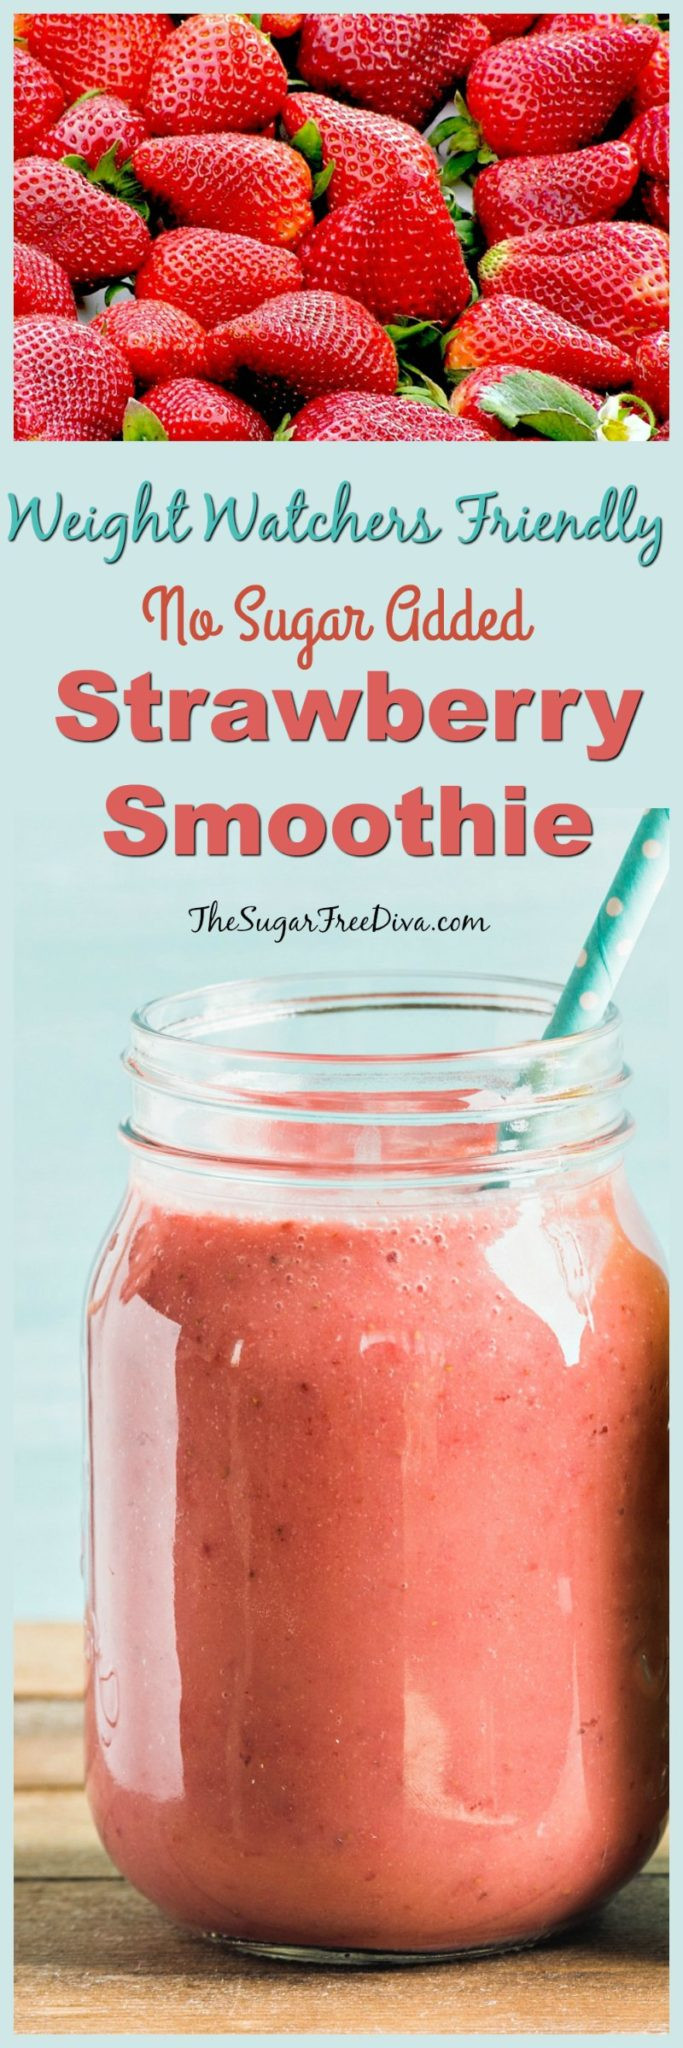 Weight Watchers Smoothies
 How to make a Weight Watchers Friendly Strawberry Smoothie